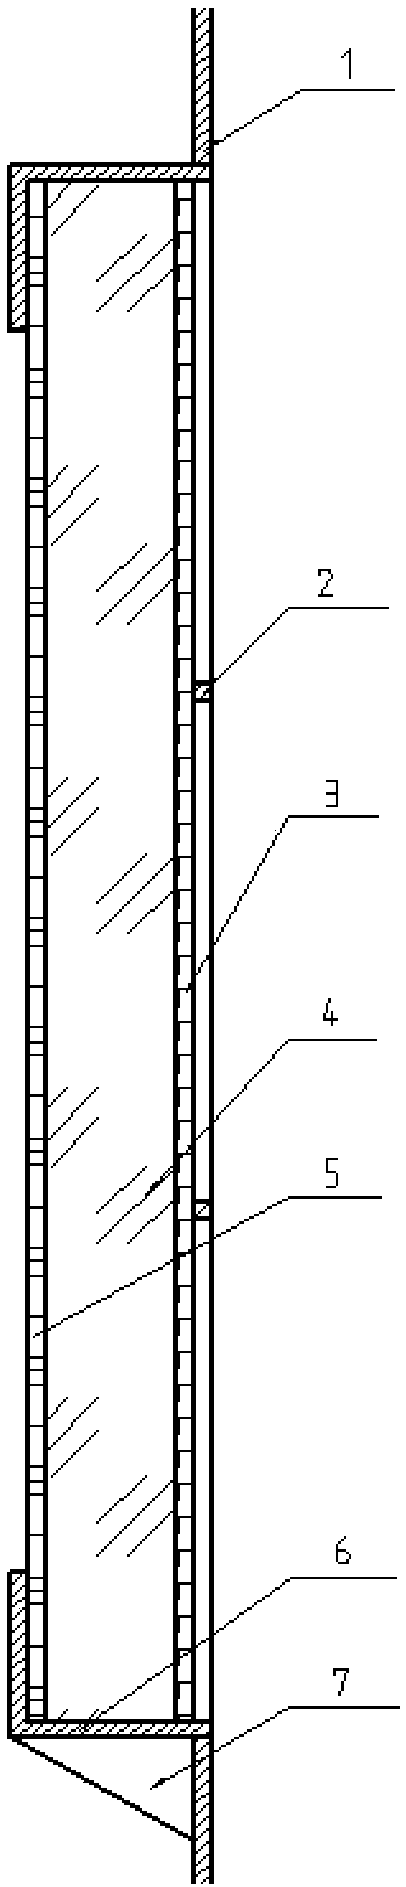 Safety protection window structure for high-speed machine tool